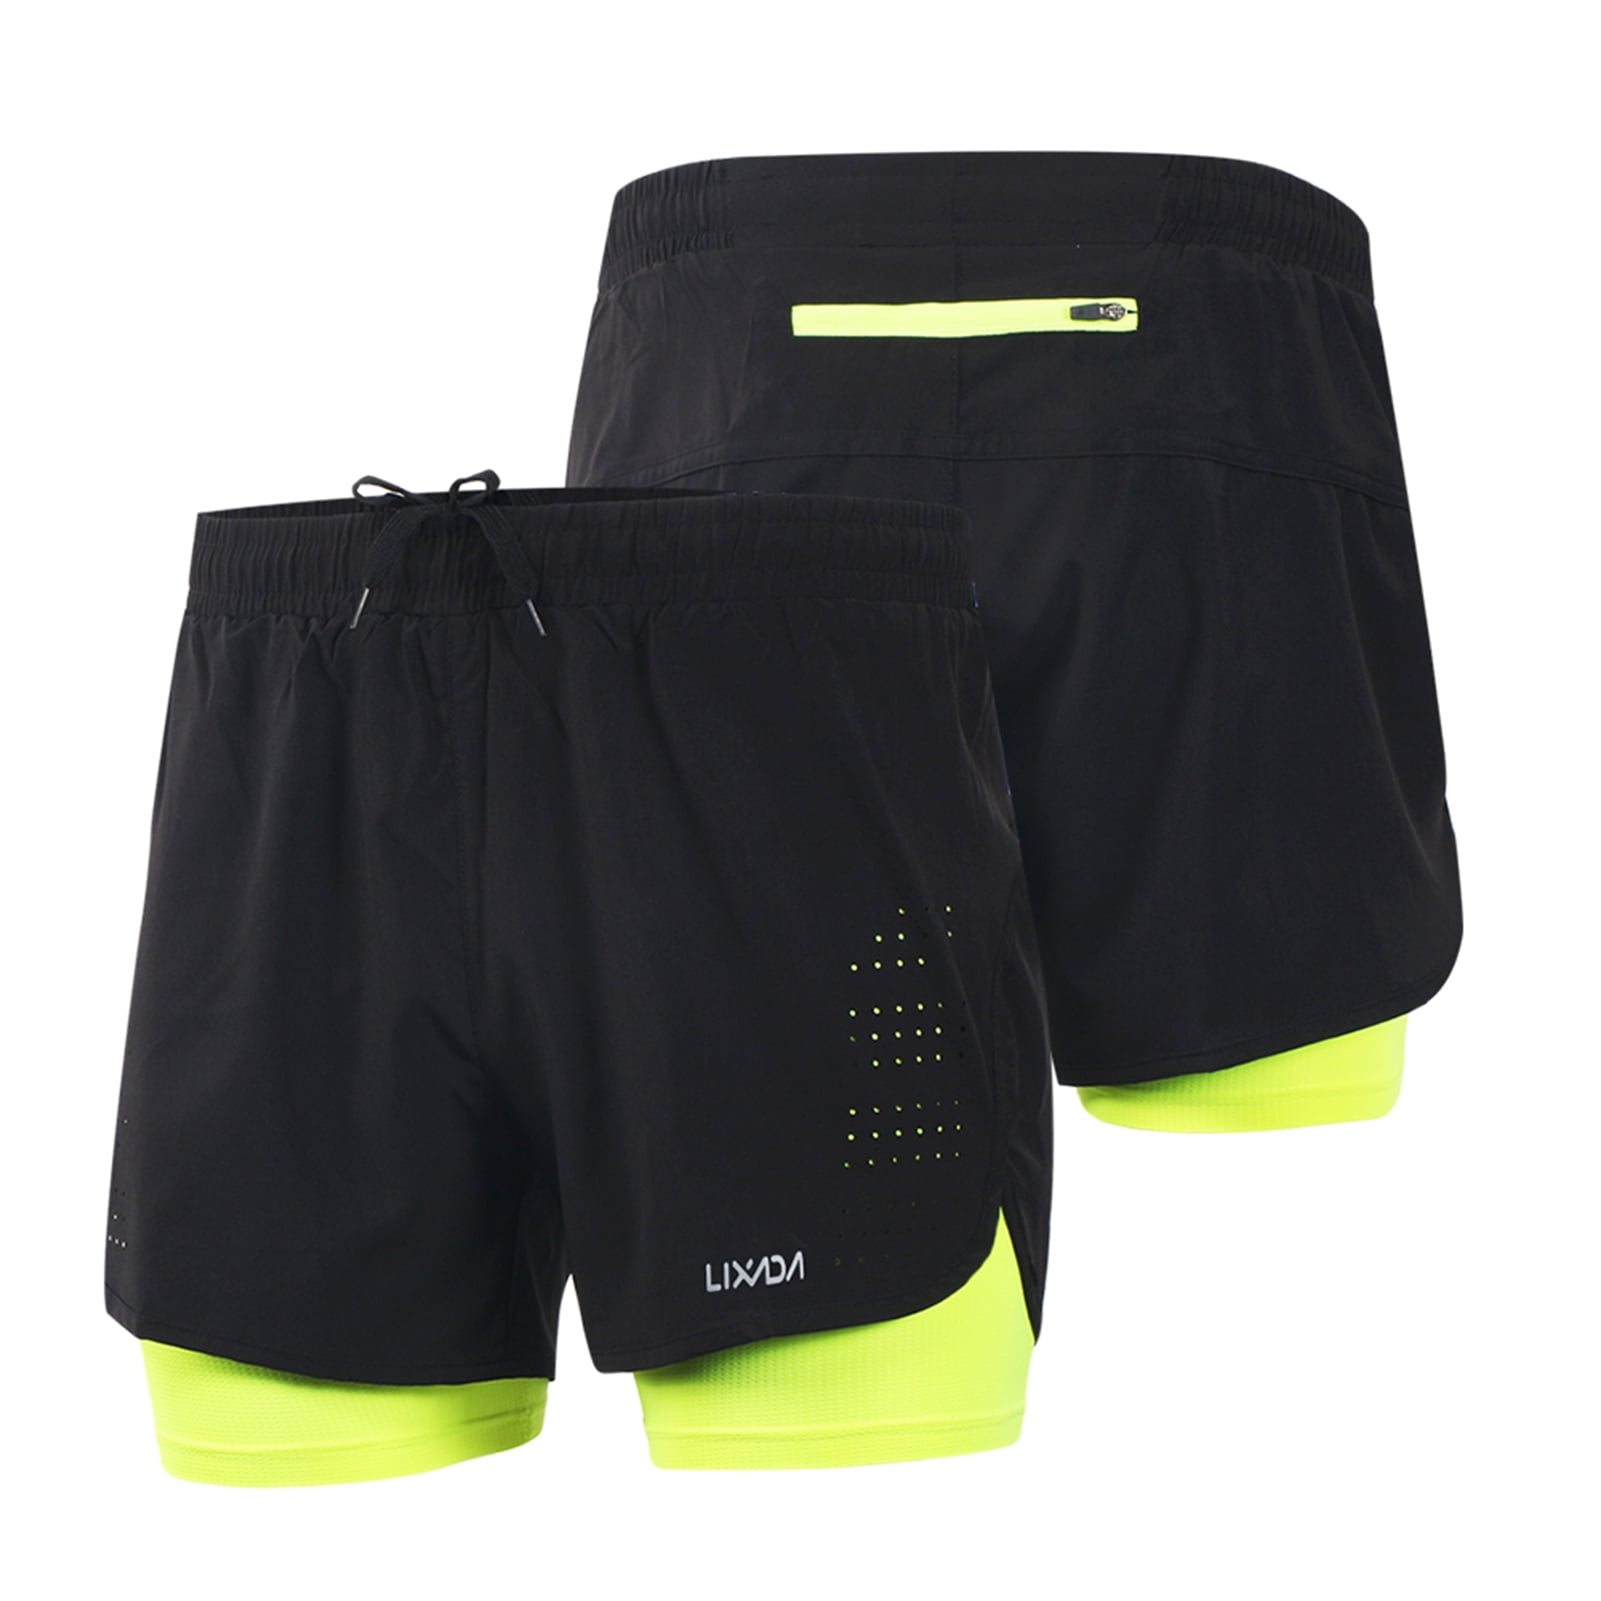 Mens Running Shorts Training Exercise Jogging Sport Shorts With Liner Reflective 